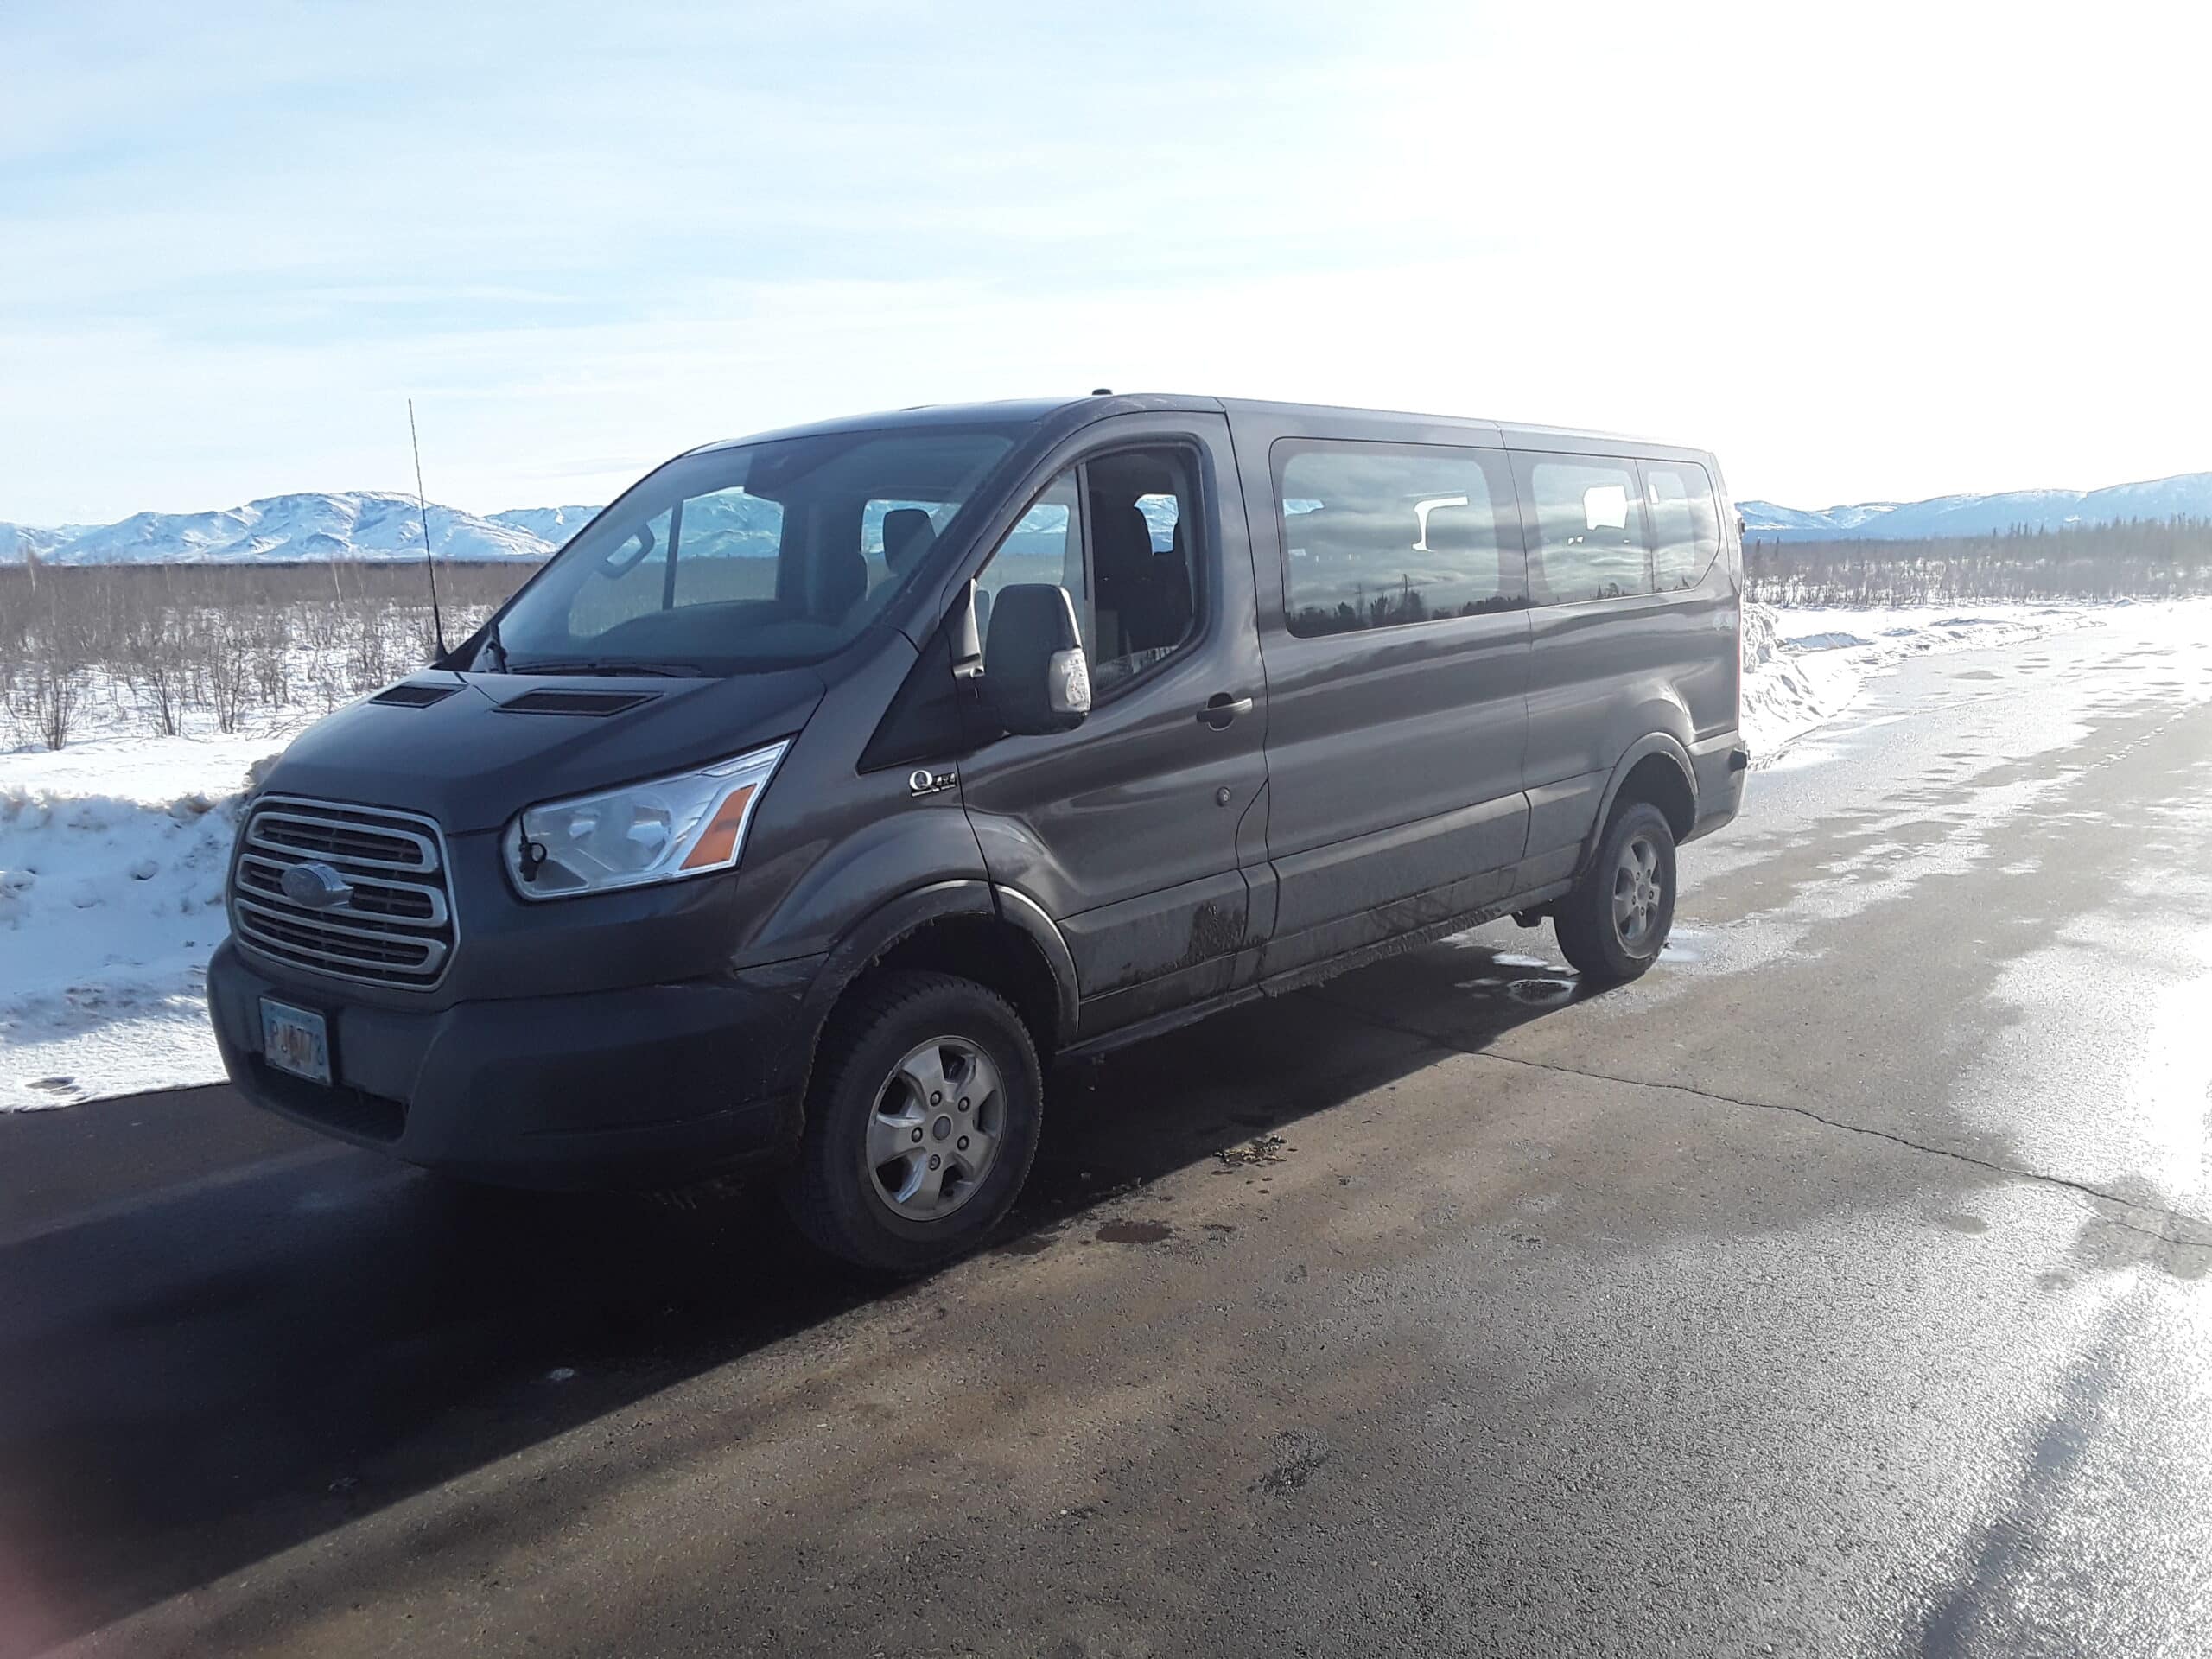 lateral view of a black passenger van during daylight on a paved road with a mountain in the background.